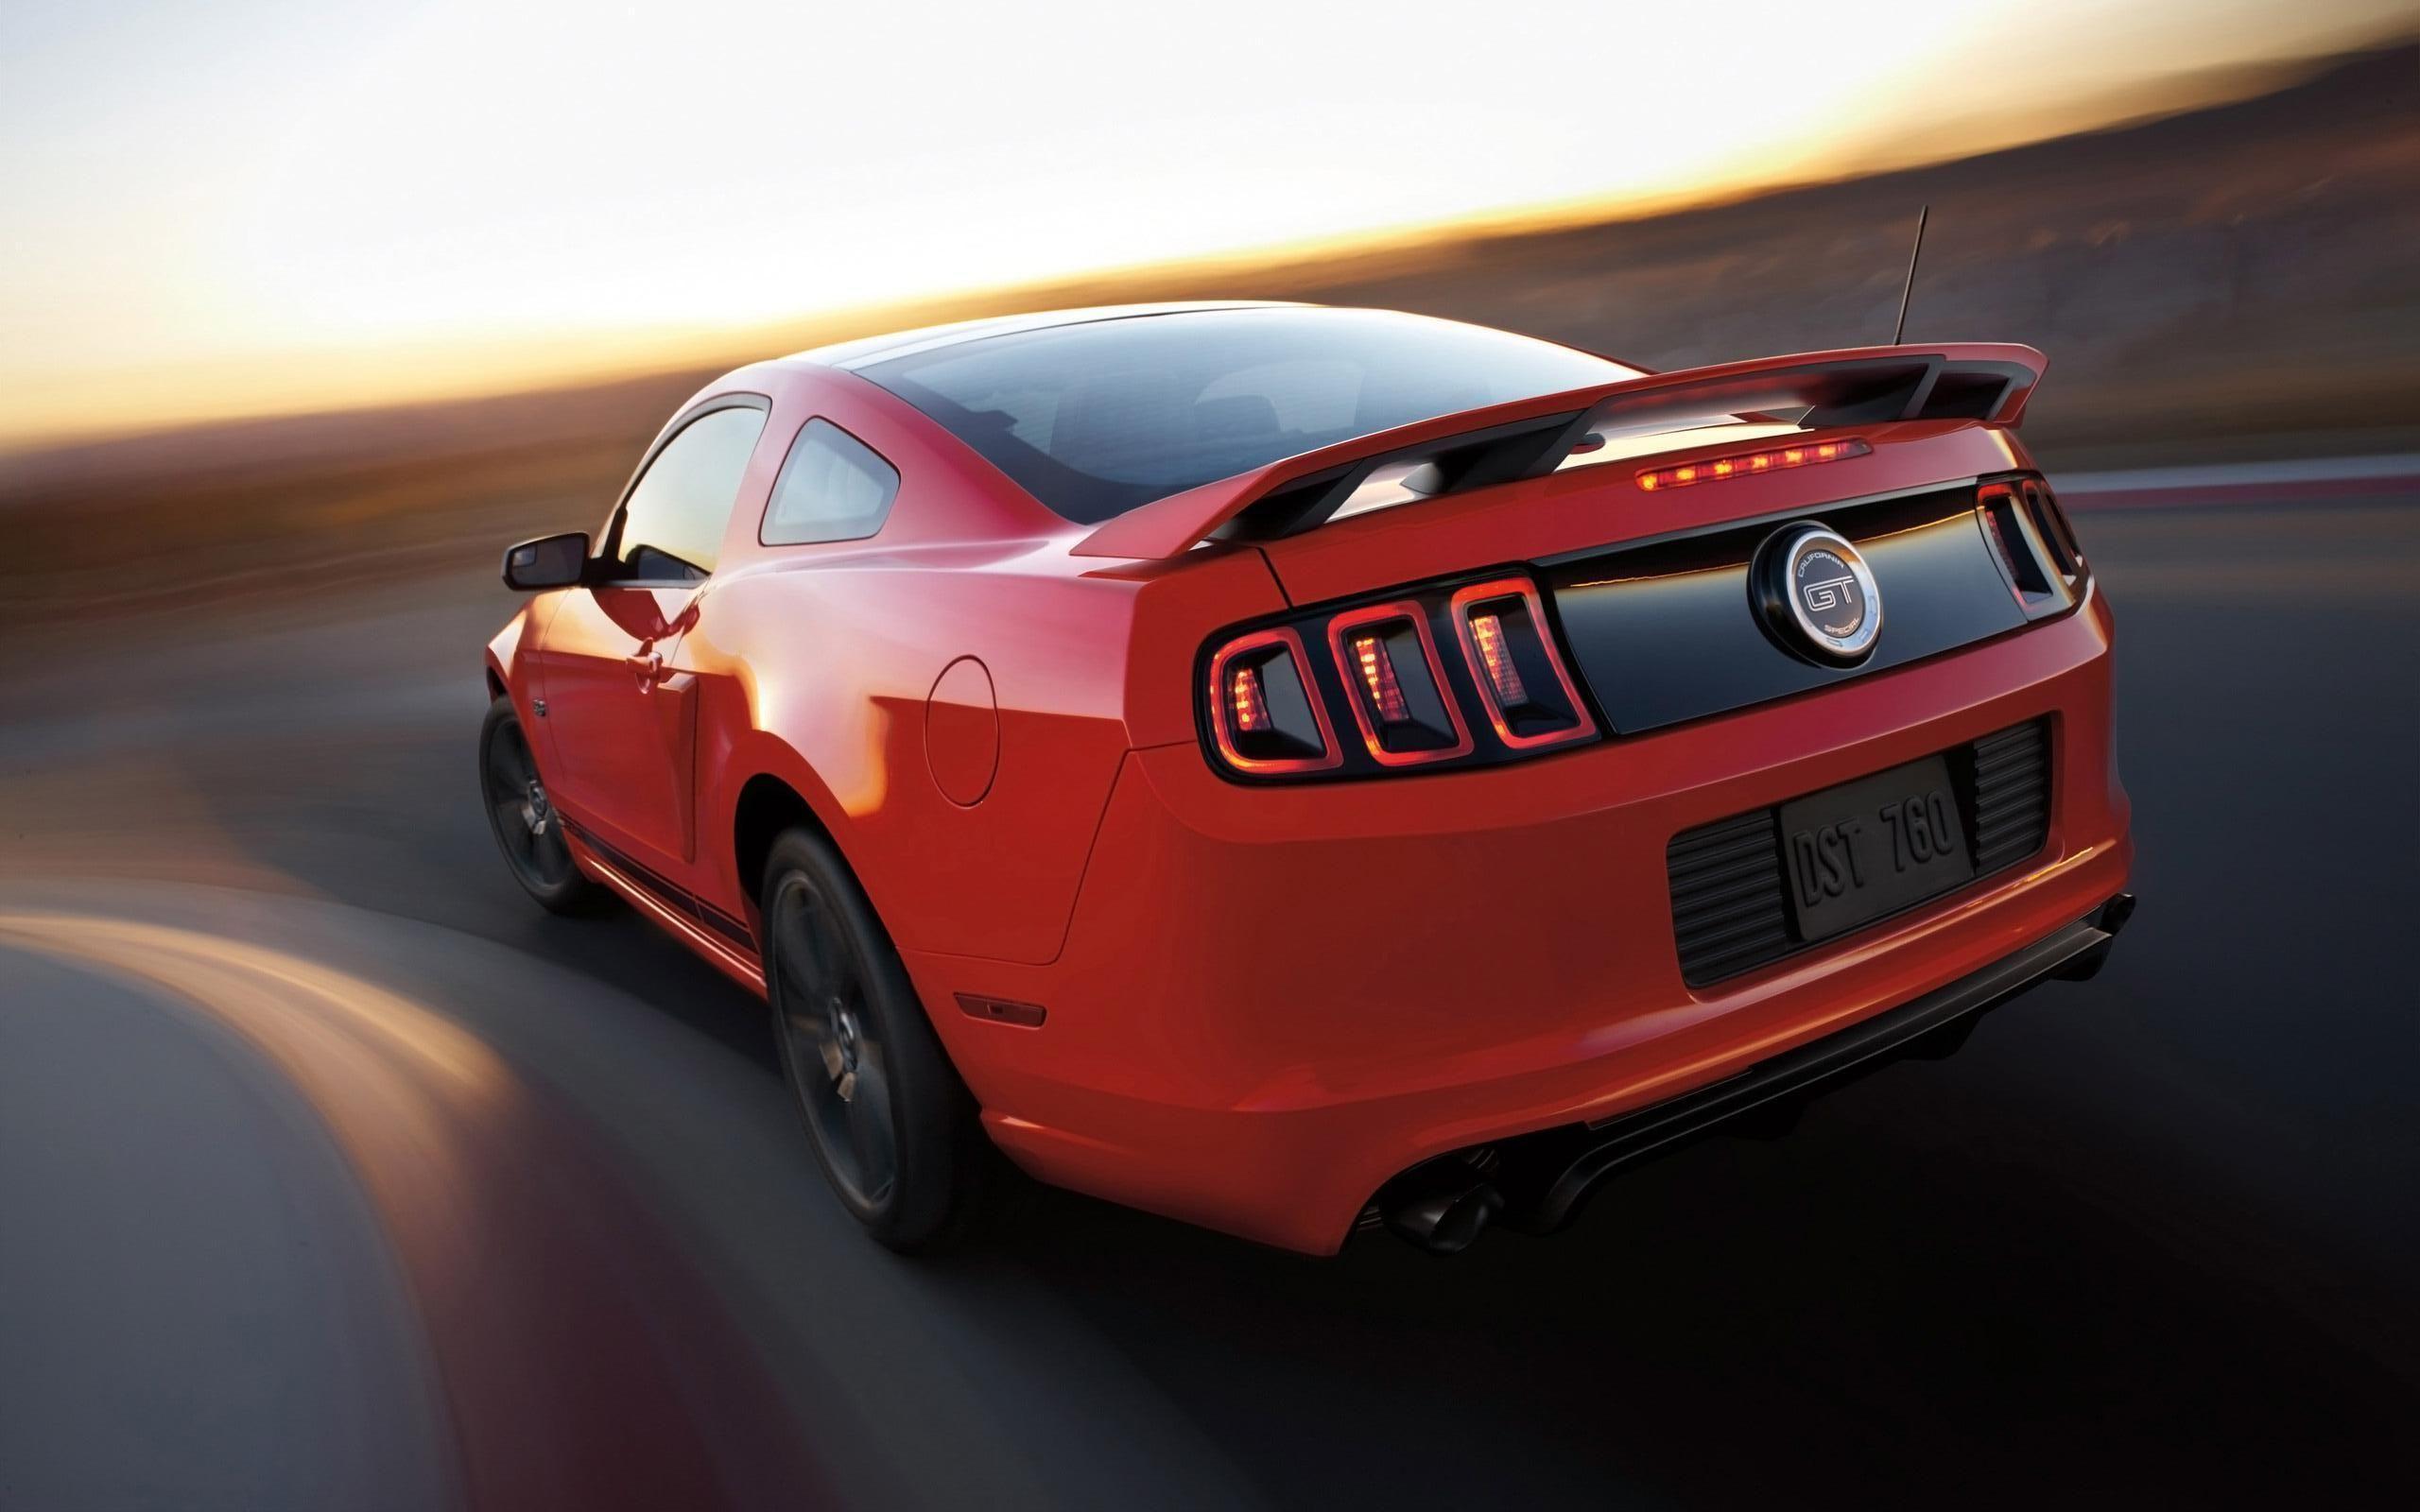 RED FORD MUSTANG REAR WALLPAPER